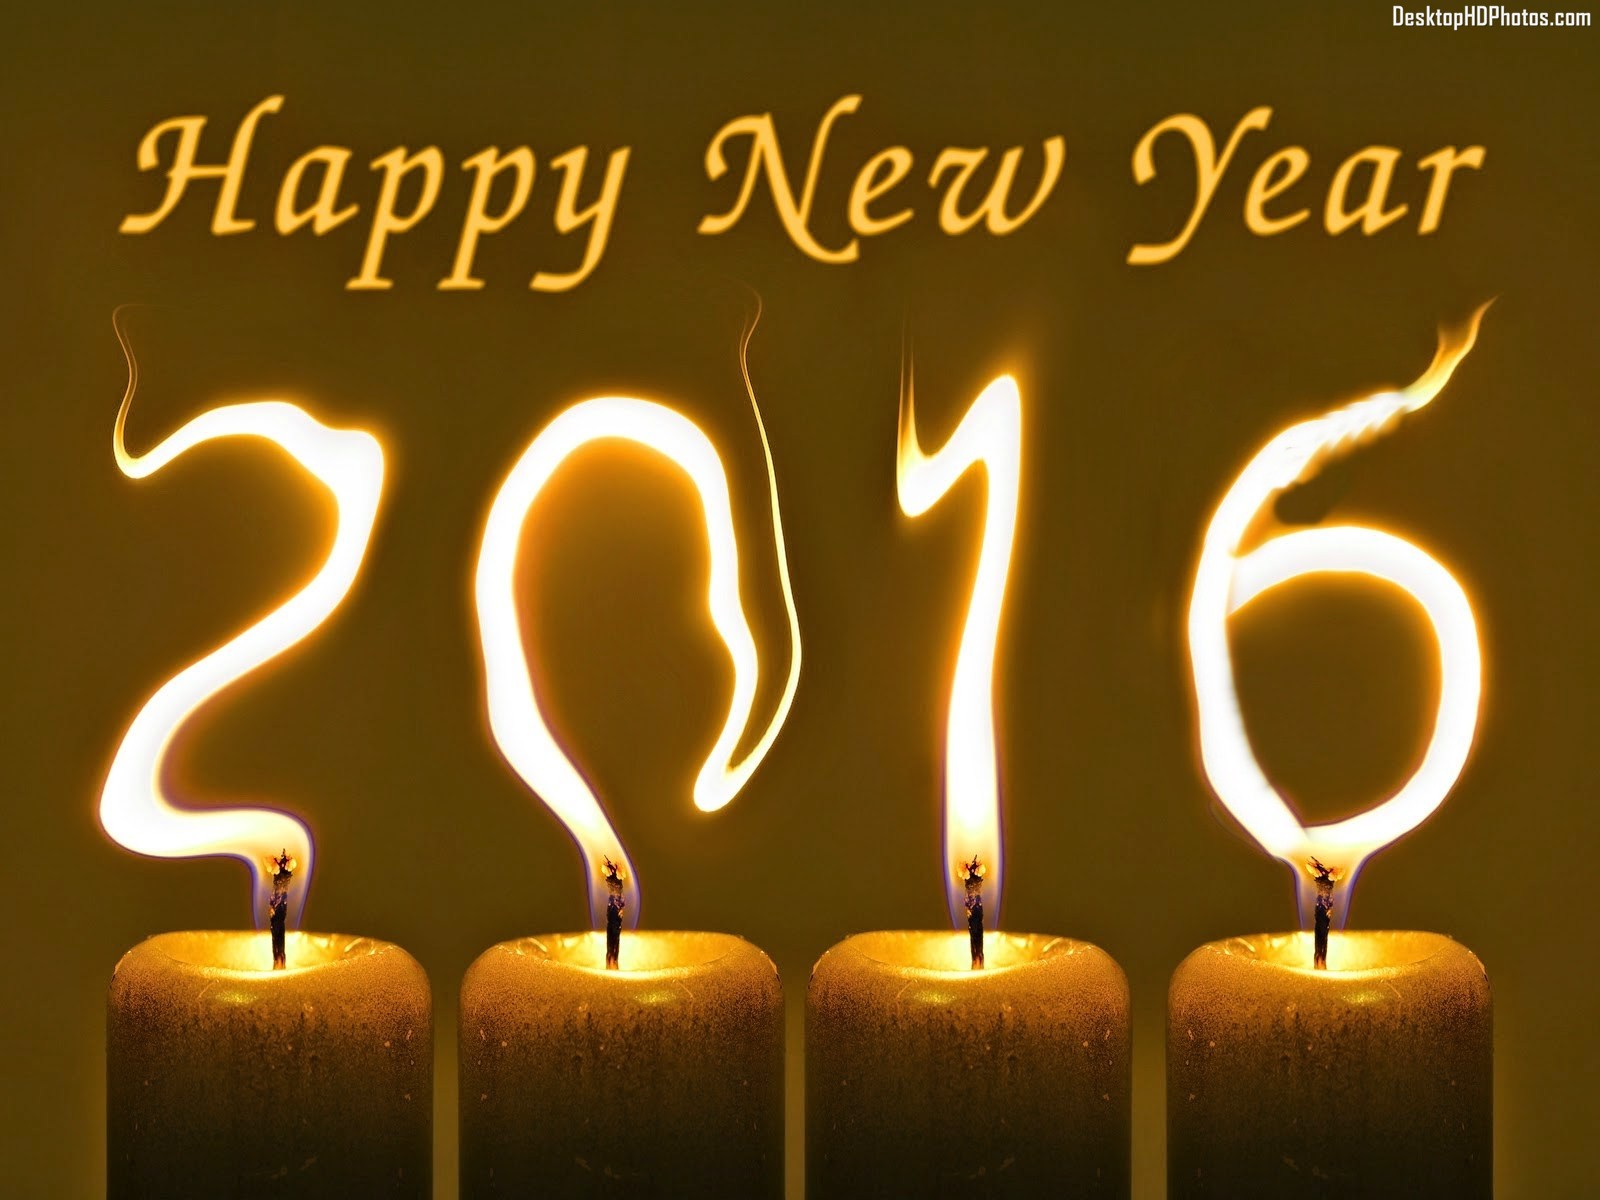 Happy New Year 2016 HD Images Wallpapers Photos